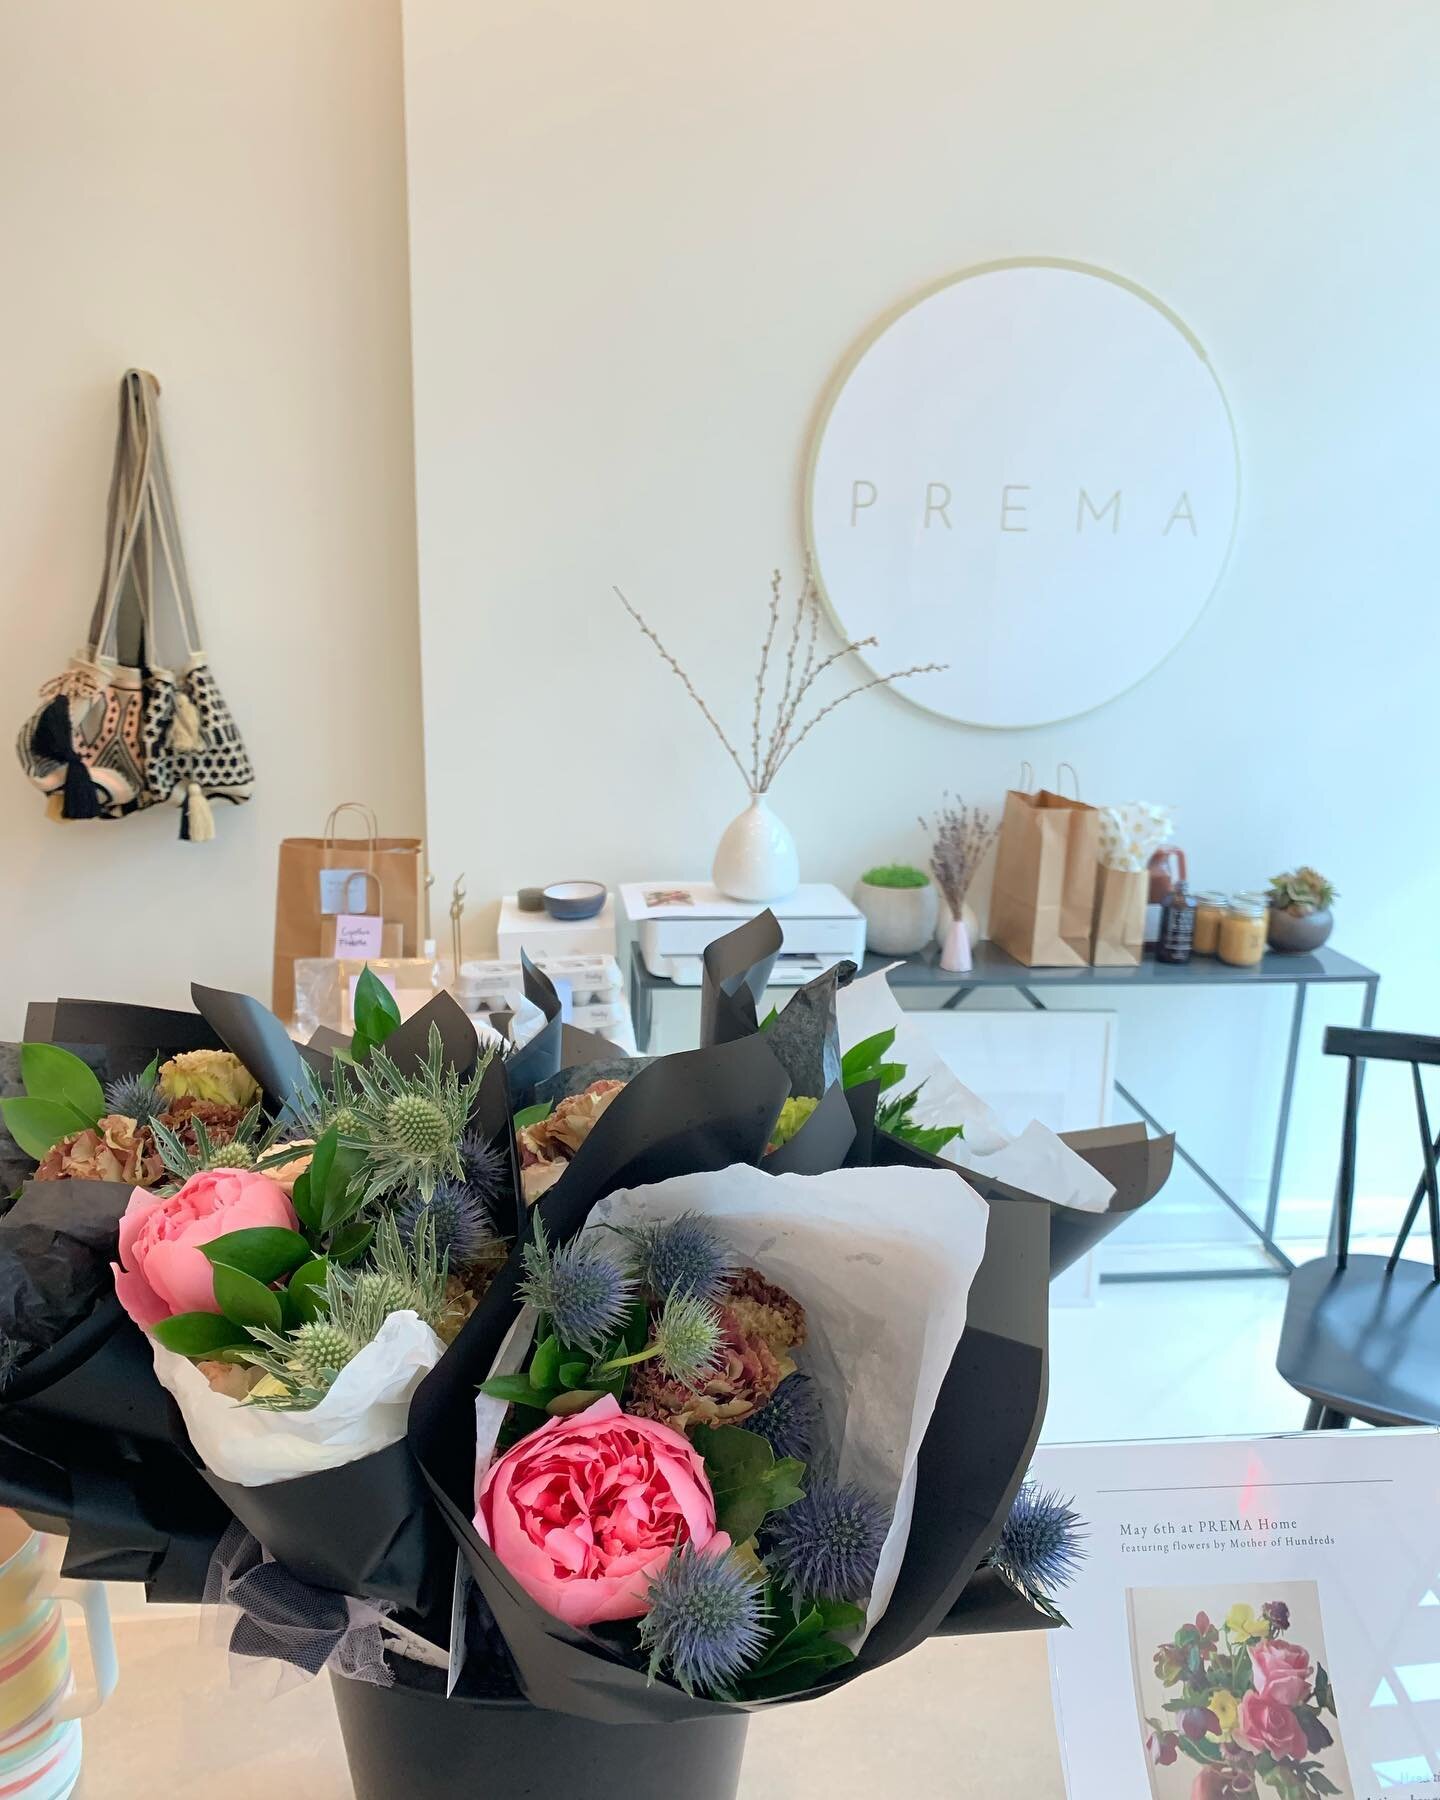 Bouquets for an easy pick up at @prema_home now until Sunday, May 8th. Limited quantities available so move fast! 

976 Fulton Street 

Closes at 7pm today
Saturday: 8am-5pm
Sunday: 8am-7pm 

🖤🖤🖤